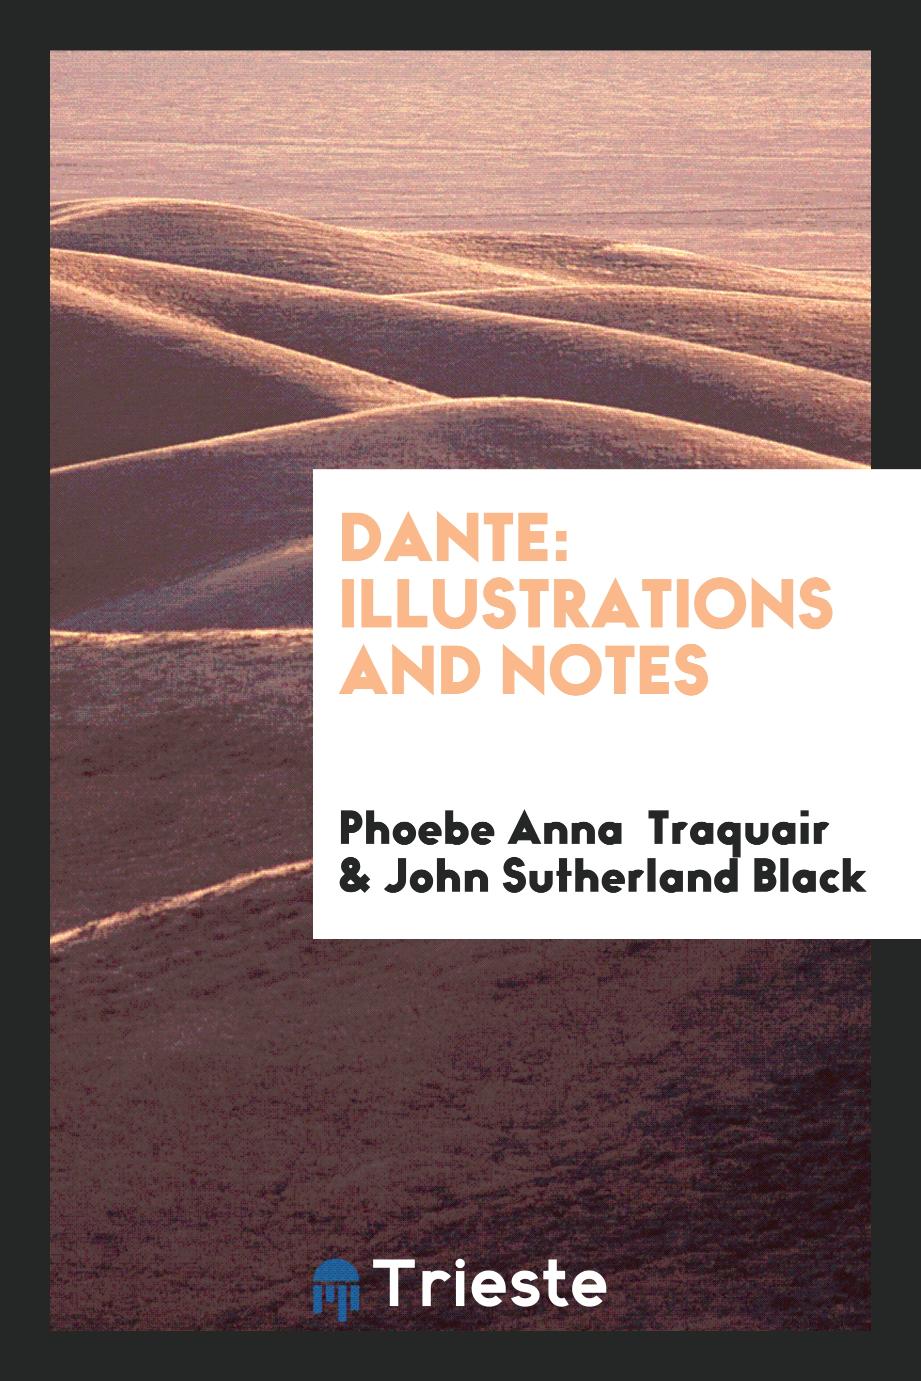 Dante: illustrations and notes